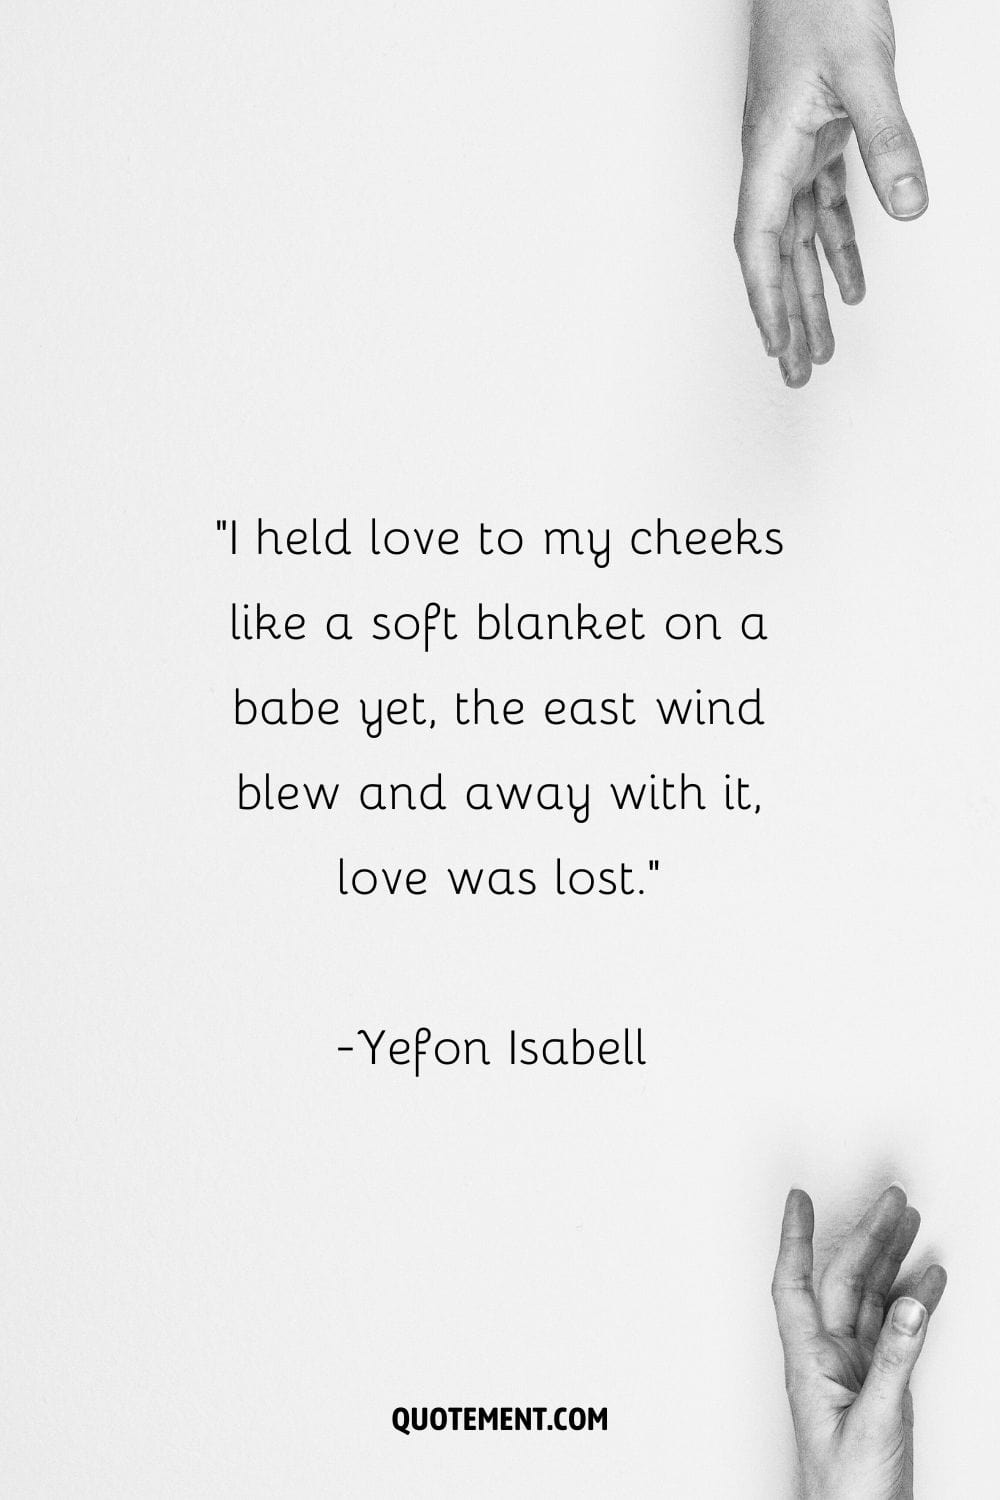 I held love to my cheeks like a soft blanket on a babe yet, the east wind blew and away with it, love was lost